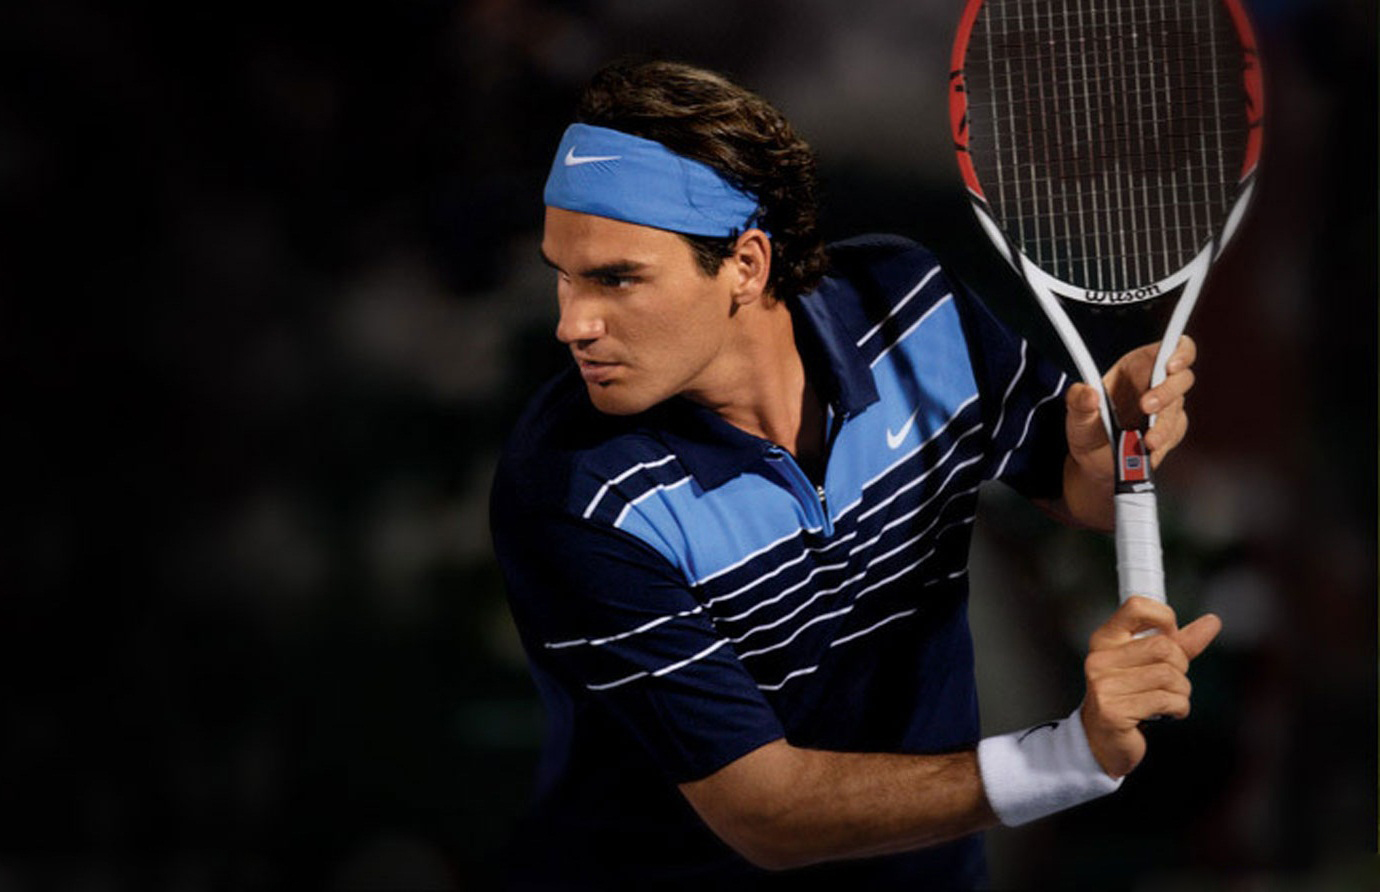 Roger Federer Latest HD Wallpaper 2013 | It's All About Sports Player Hd Wallpapers